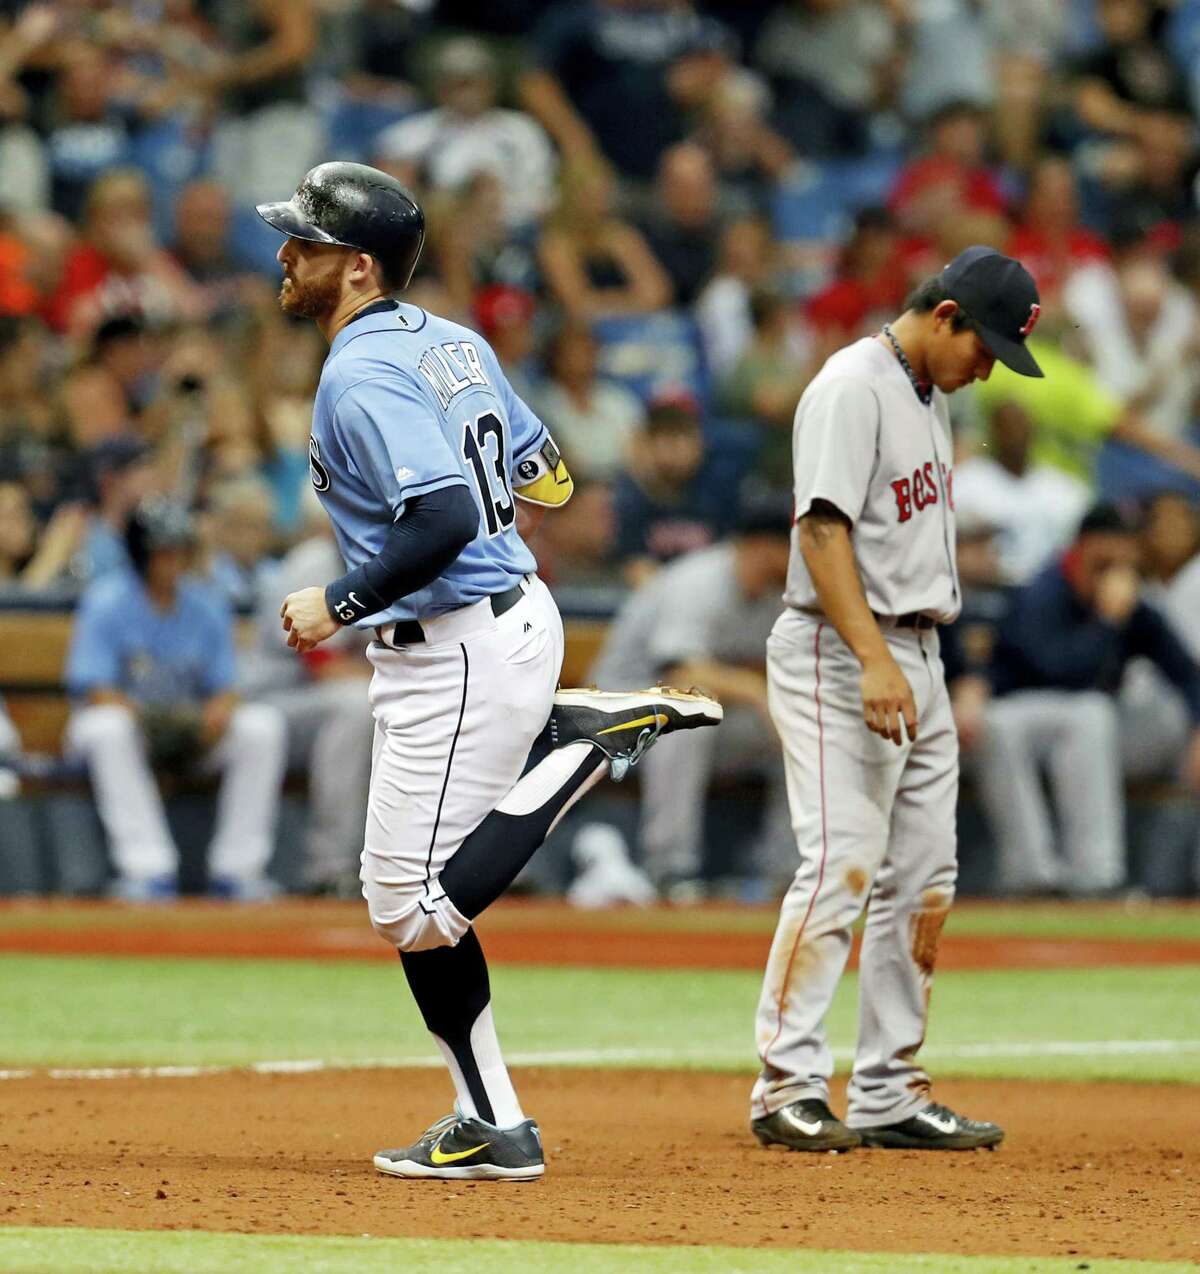 The Rays’ Brad Miller rounds the bases after his two-run home run.